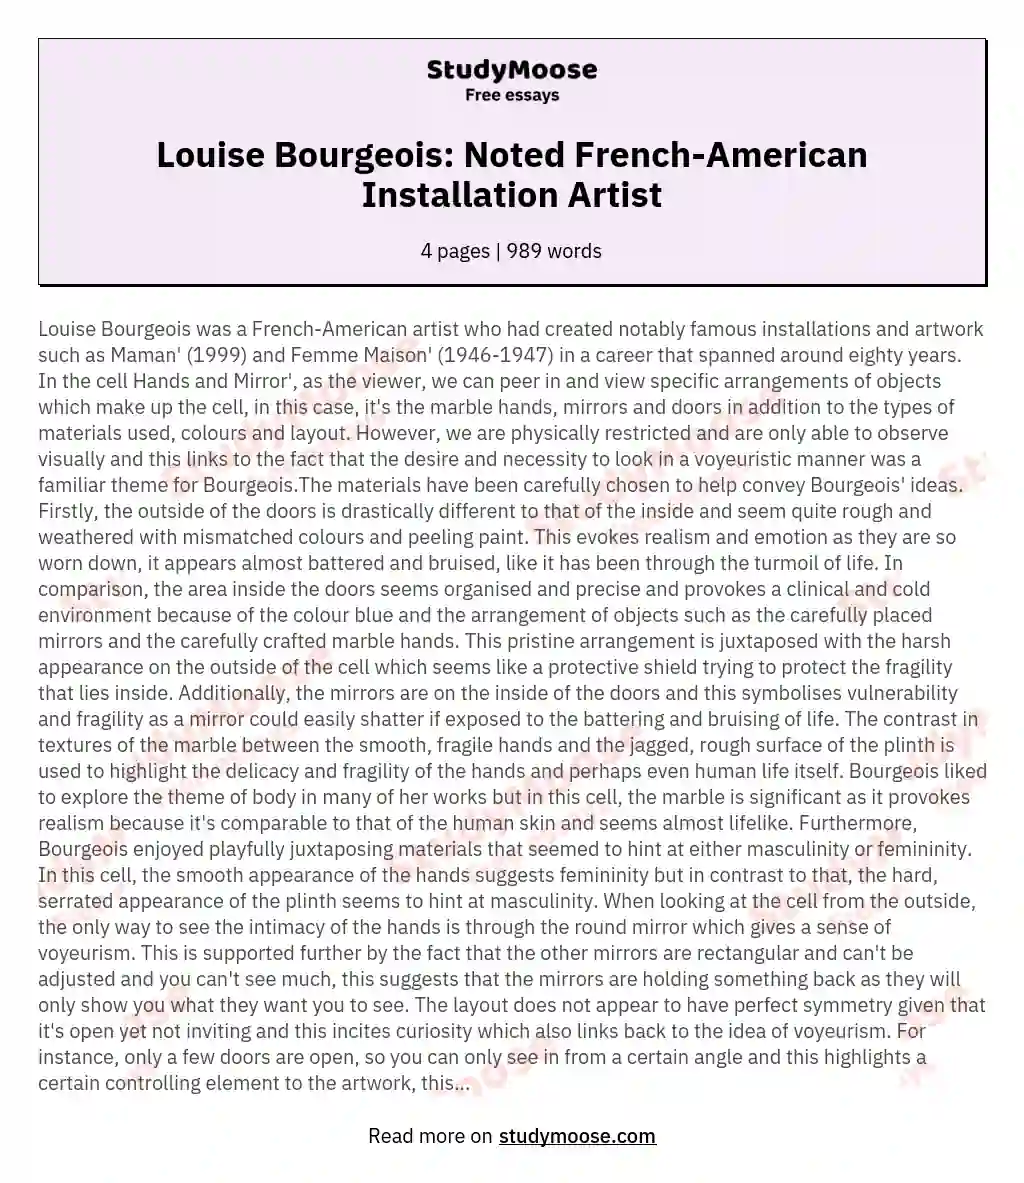 Louise Bourgeois: Noted French-American Installation Artist essay